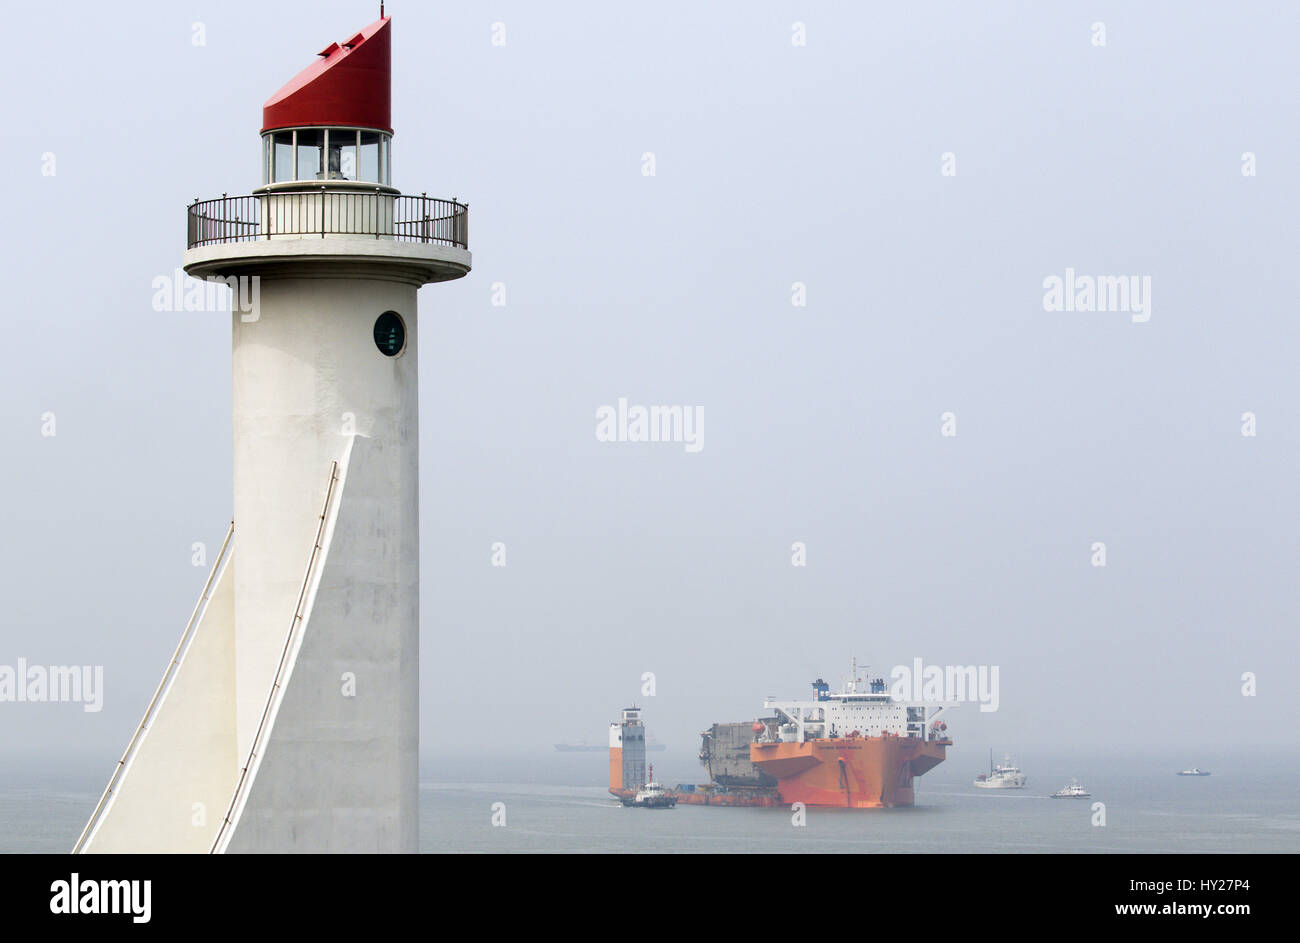 Mokpo, South Korea. 31st March 2017. South Korea's Coast Guard vessels escort semi-submersible ship Dockwise White Marlin carrying Sewol Ferry en route to Mokpo New Port in Mokpo, about 311 km (193 miles) south of Seoul, South Korea. The Sewol Ferry sailed into the port on Friday, about three years after it sank off South Korea's southwestern coast near Jindo on April 16, 2014 during a journey from Incheon to Jeju. The Ferry was carrying 475 crew and passengers, mostly high school students on a school trip. b Credit: Aflo Co. Ltd./Alamy Live News Stock Photo